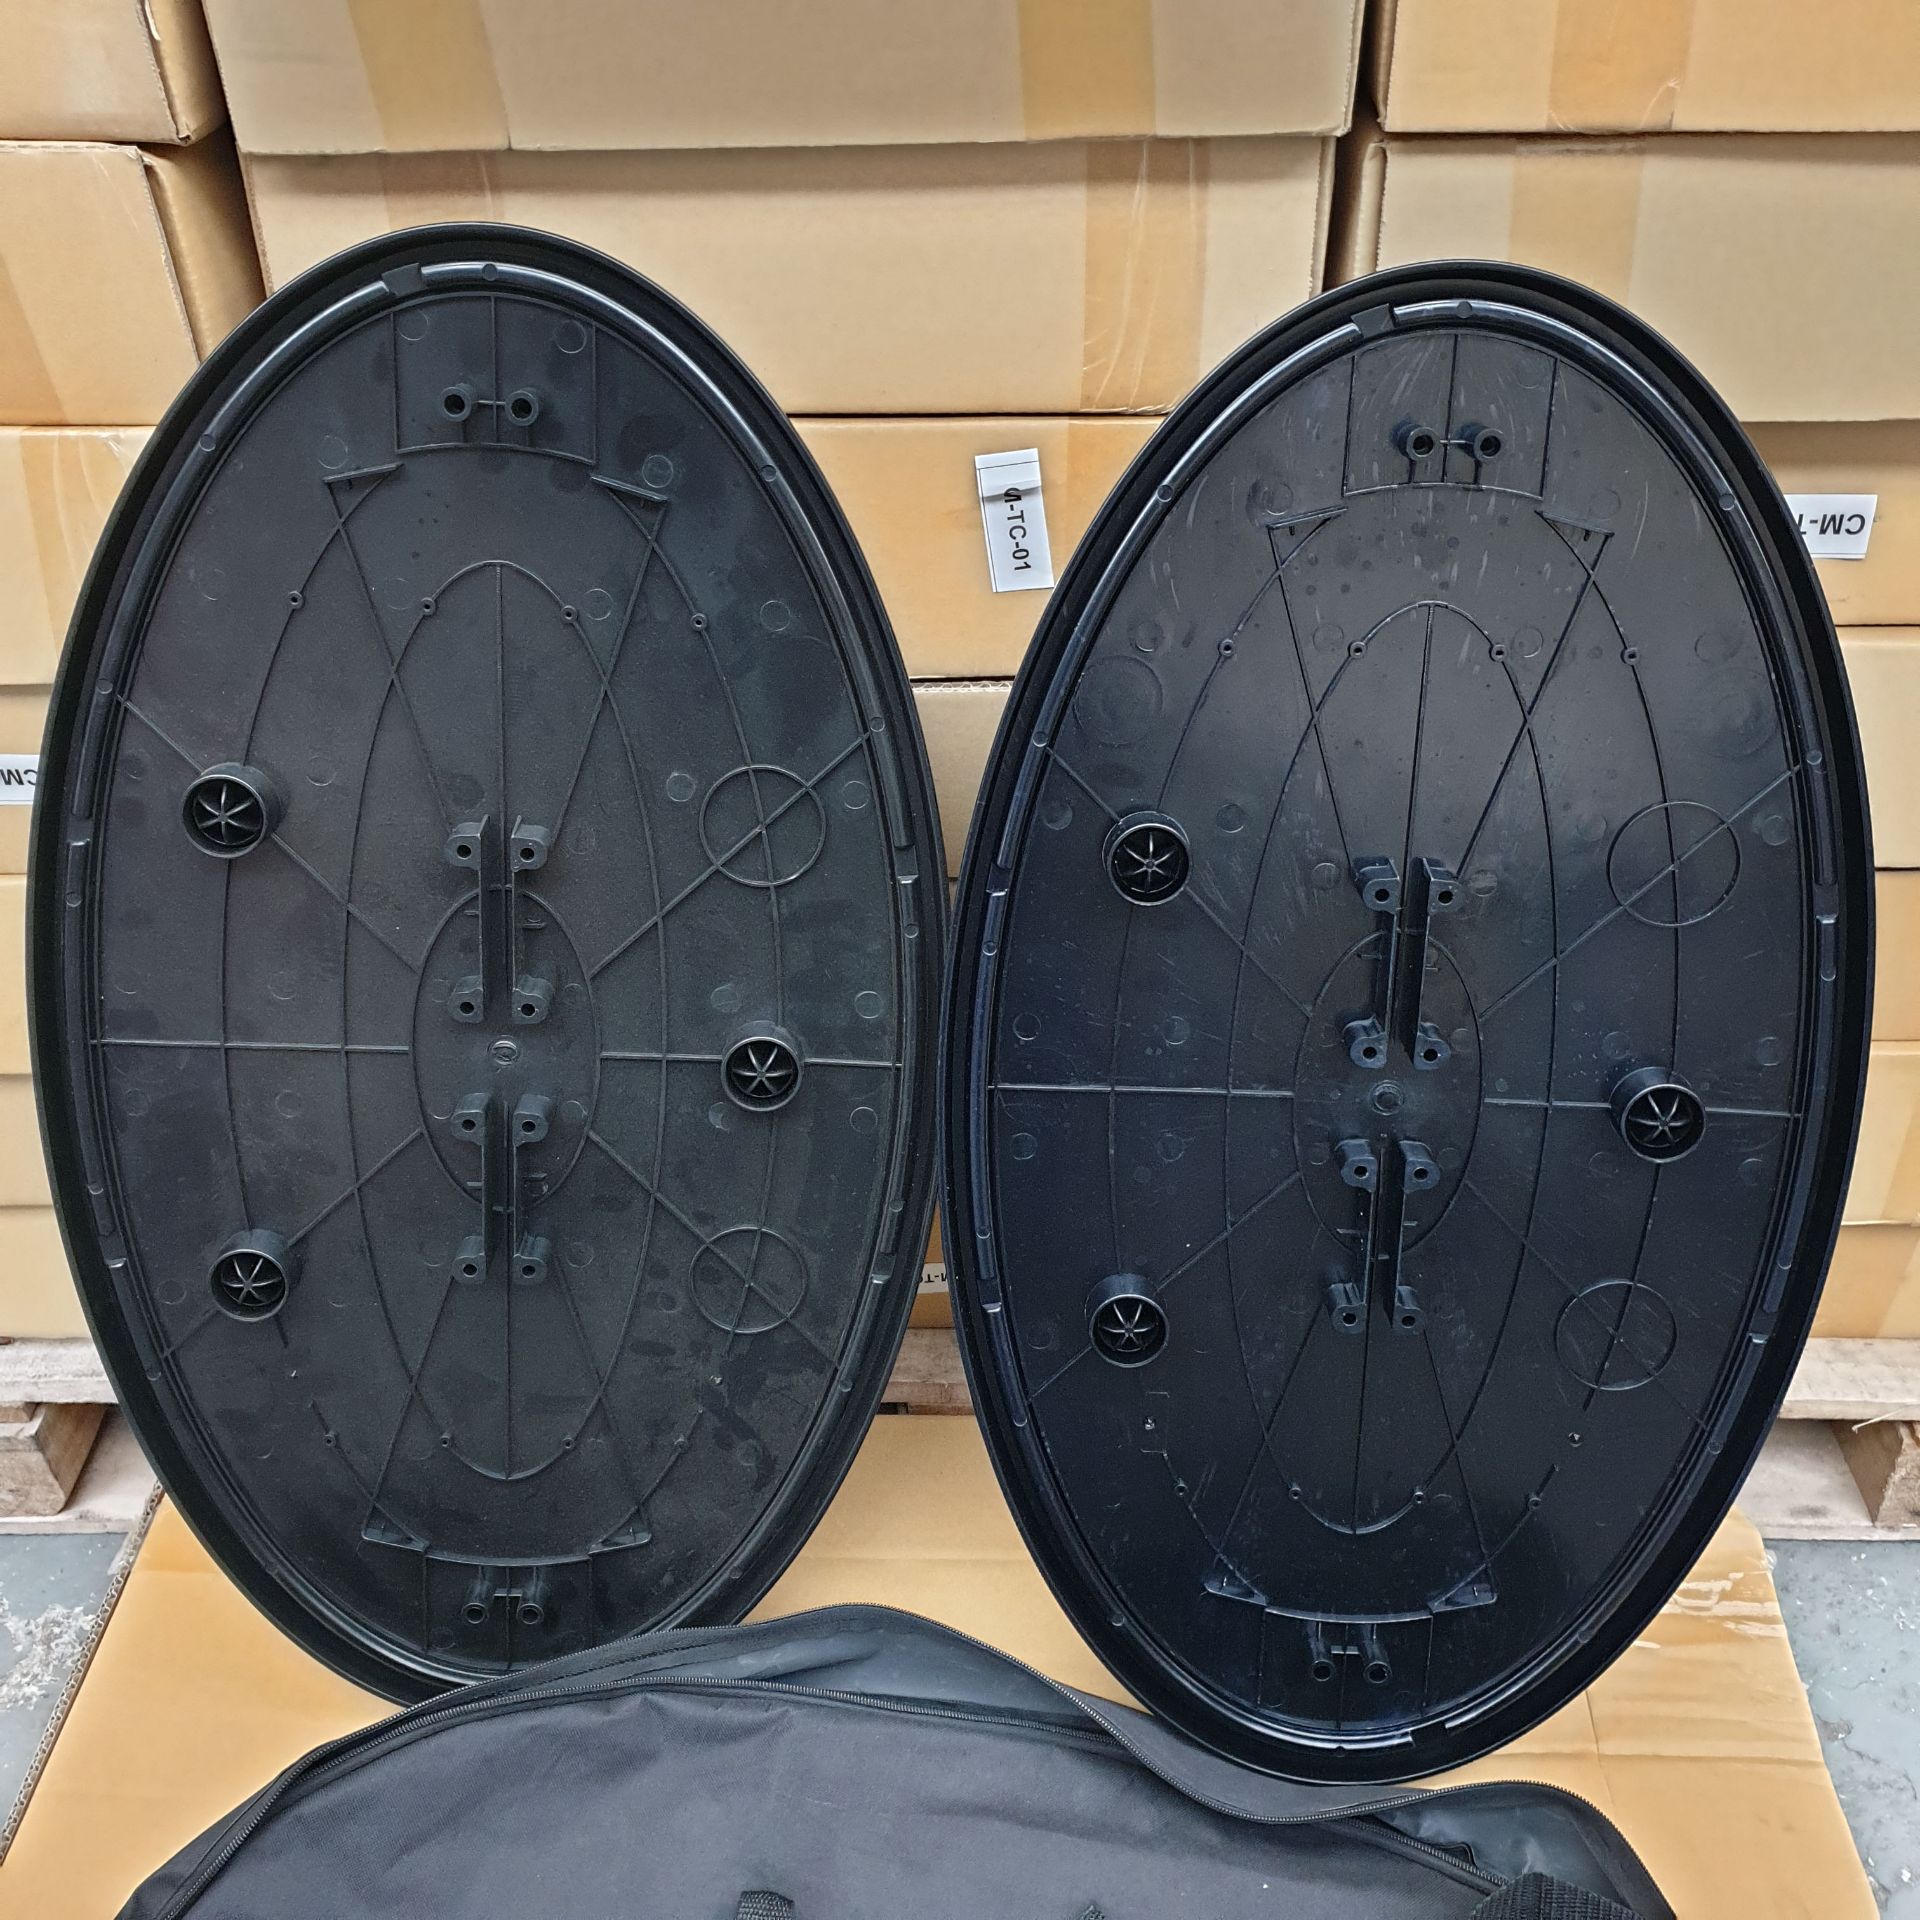 24 pairs of Lid and Base parts for Oval Display Signs. Part Number: CM-TC-01. With Carry Bags. - Image 5 of 5